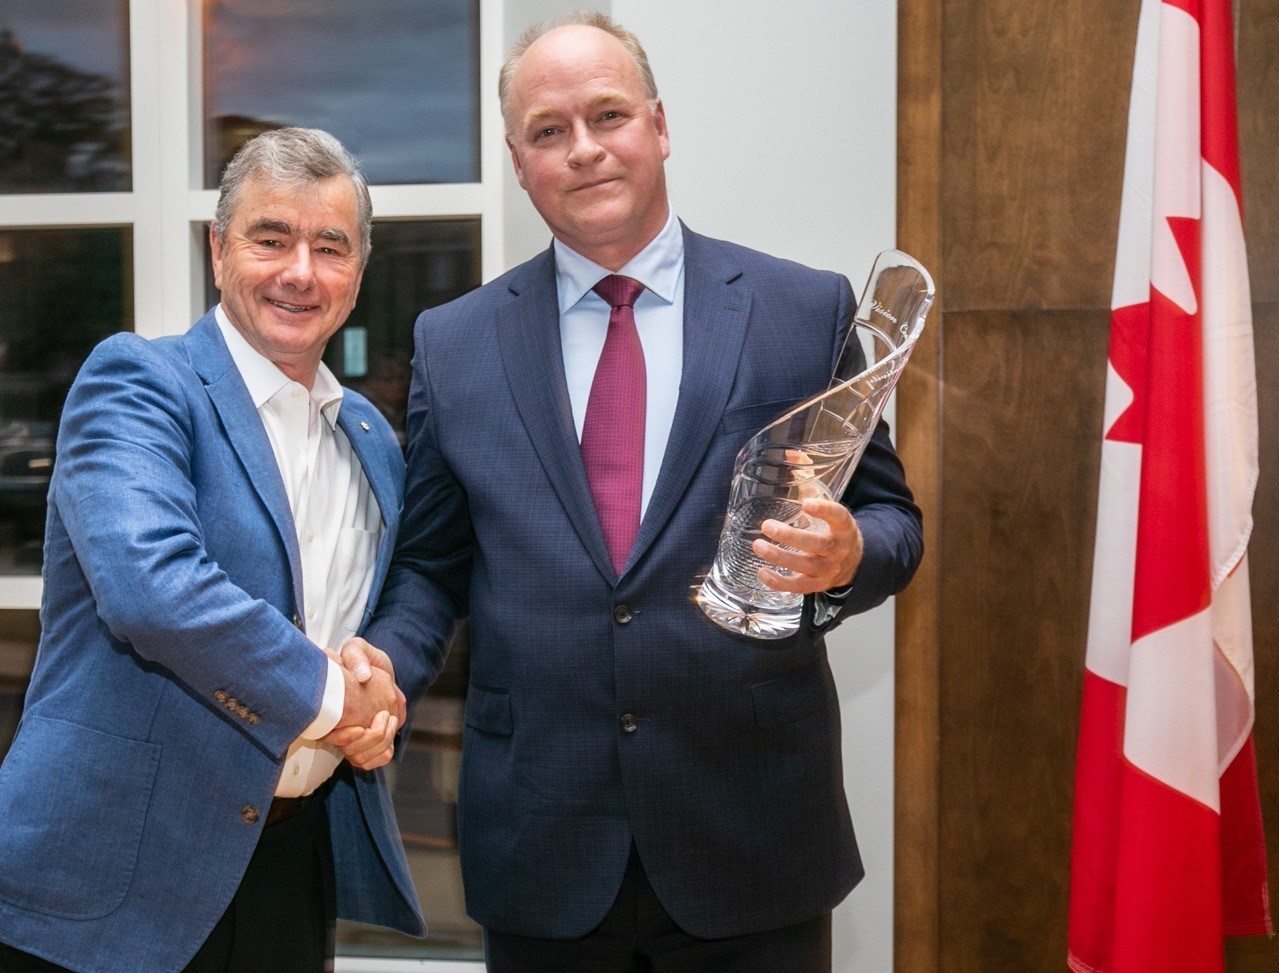 Scott Armour McCrea (right) received the Sixth Annual Samuel Cunard Prize for Vision, Courage and Creativity in Halifax, NS. McCrea is pictured with John Risley, a former recipient of the Prize  (Image at LateCruiseNews.com - September 2022)